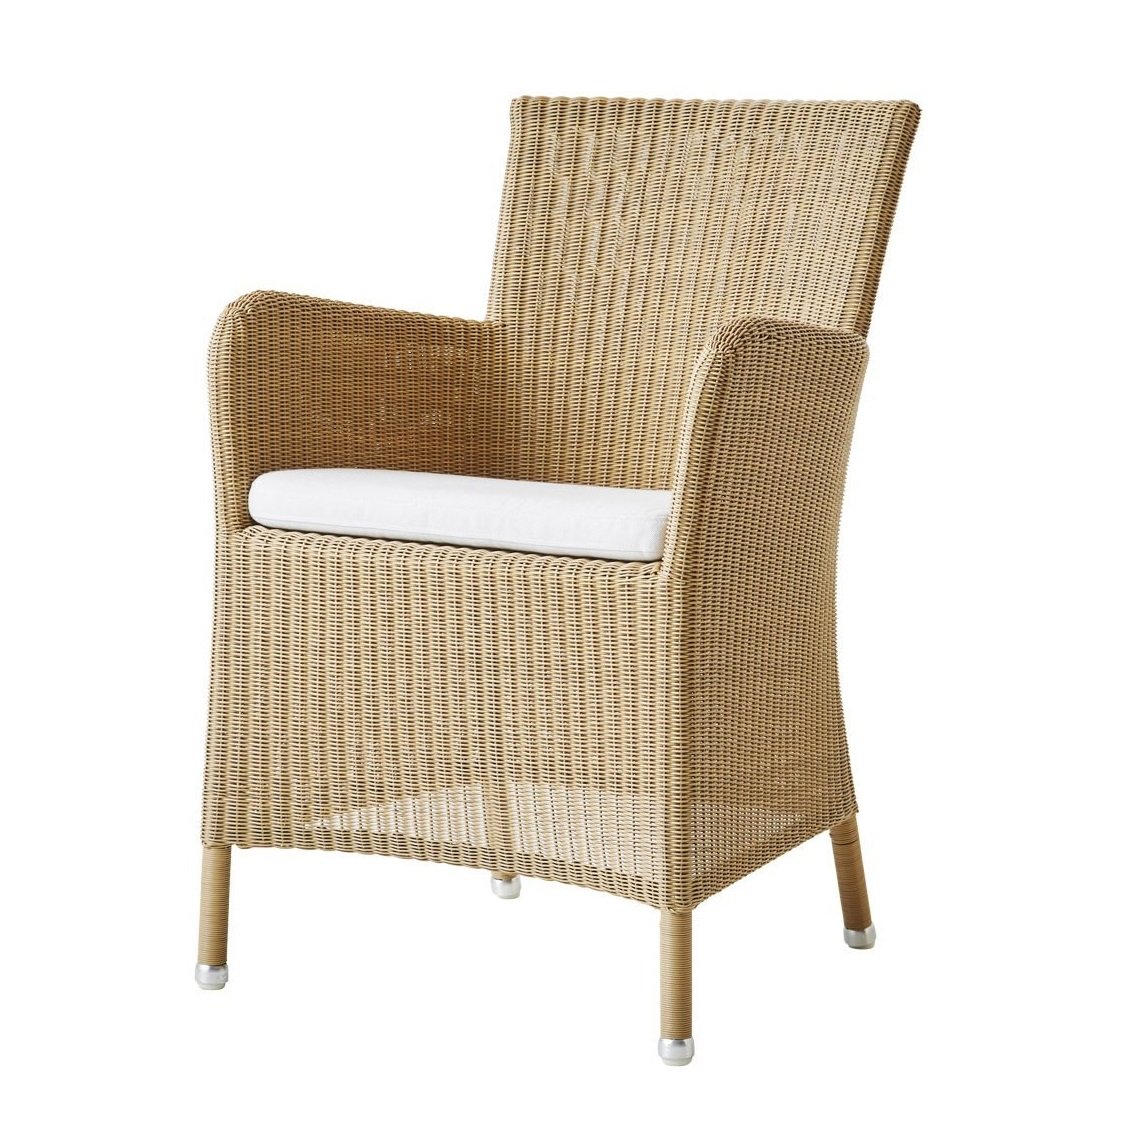 Hampsted Chair from Cane-line, designed by Cane-line Design Team